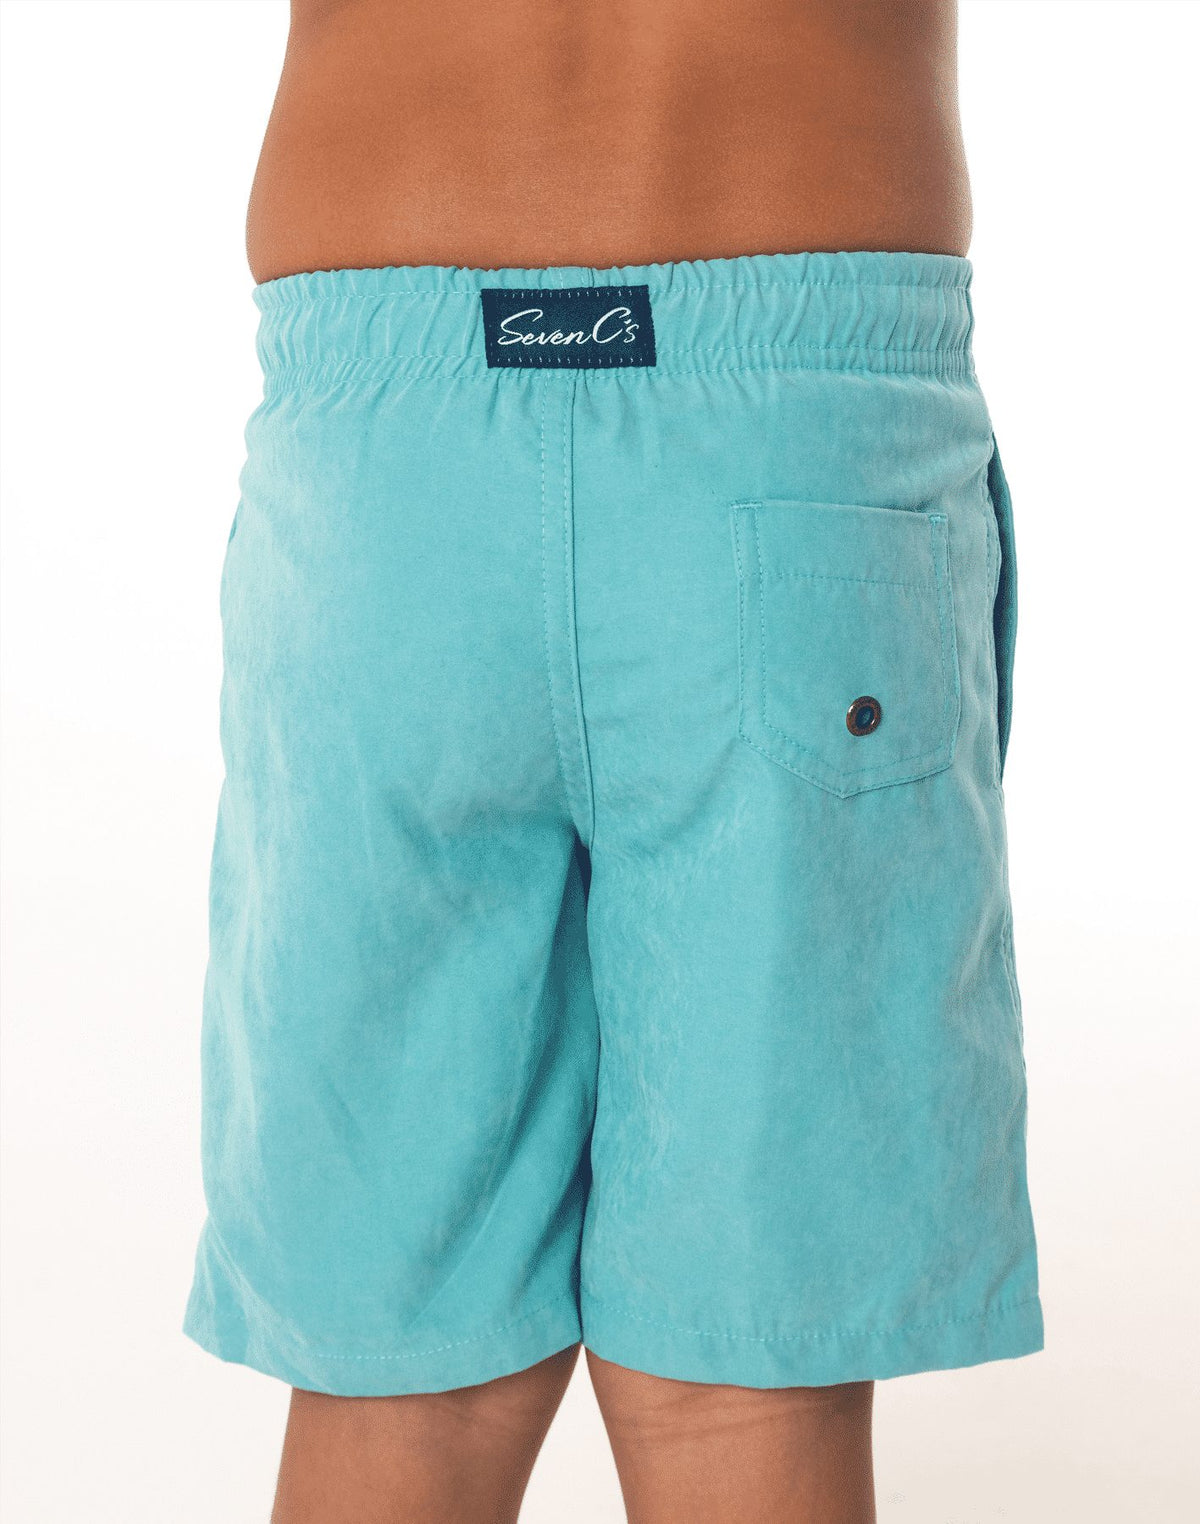 Sustainable Kids' Blue Shorts from SevenC's - Back View